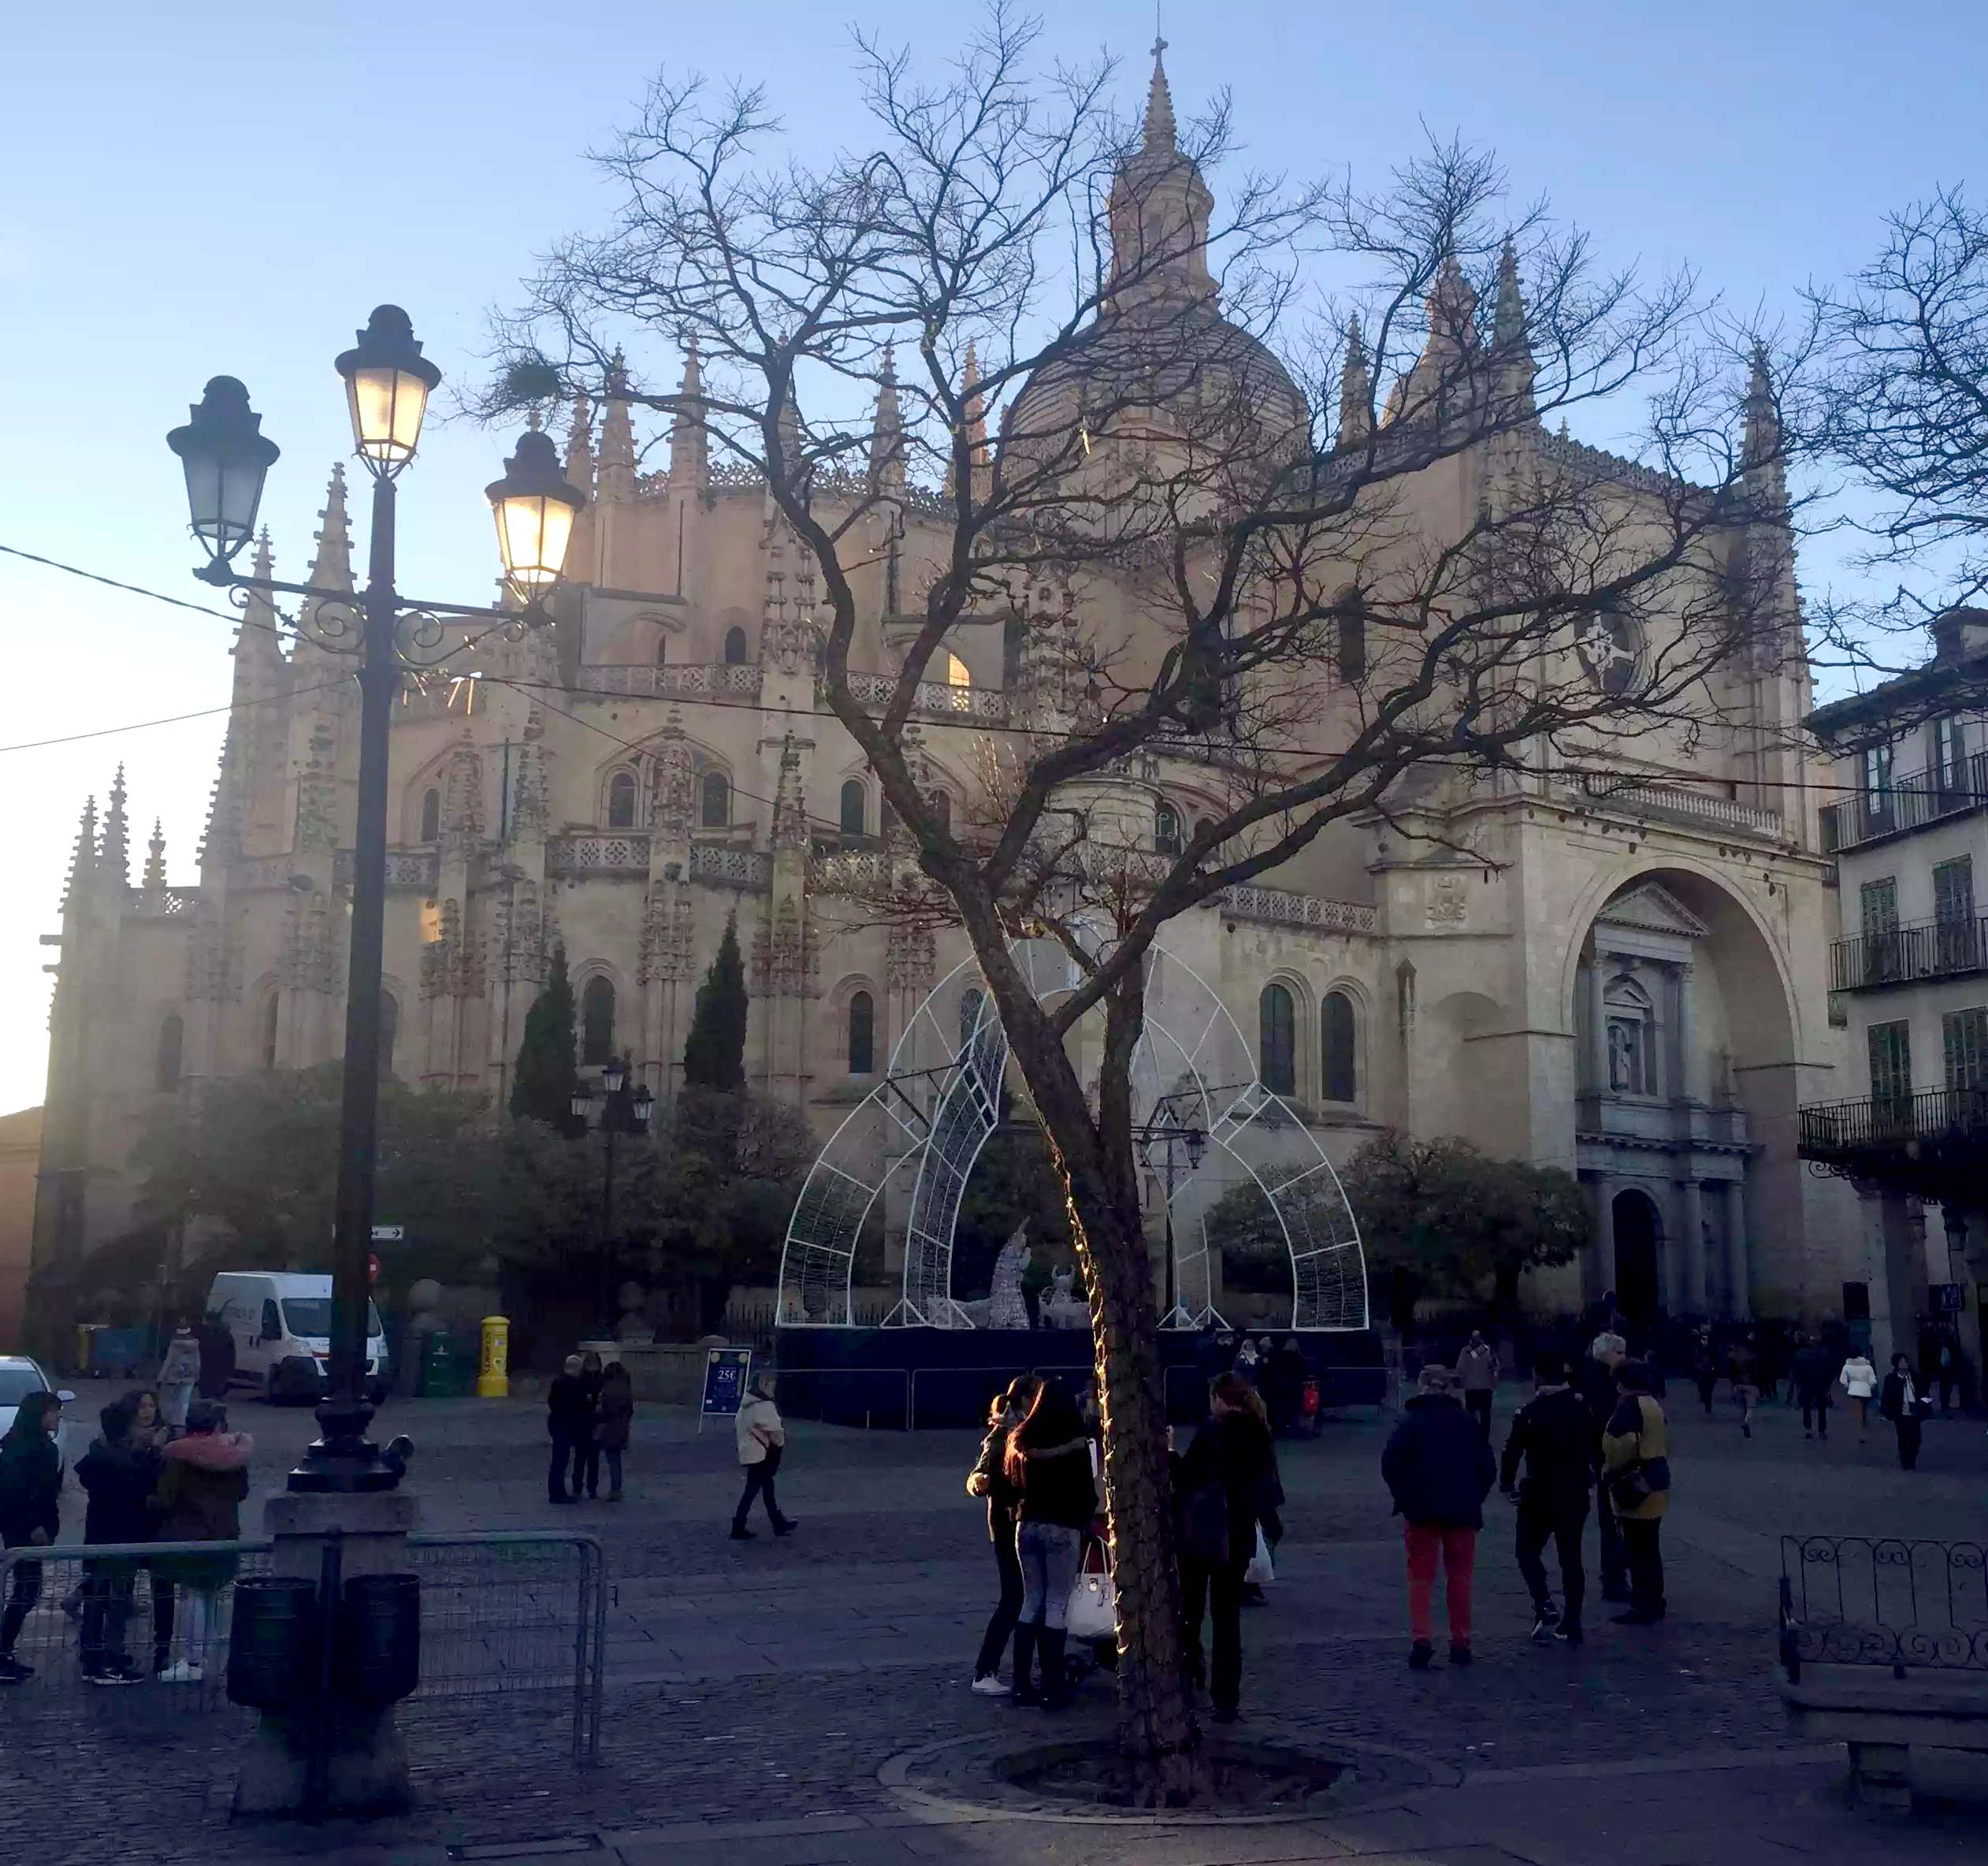 Segovia, A Day Trip From Madrid by Emma Eats & Explores